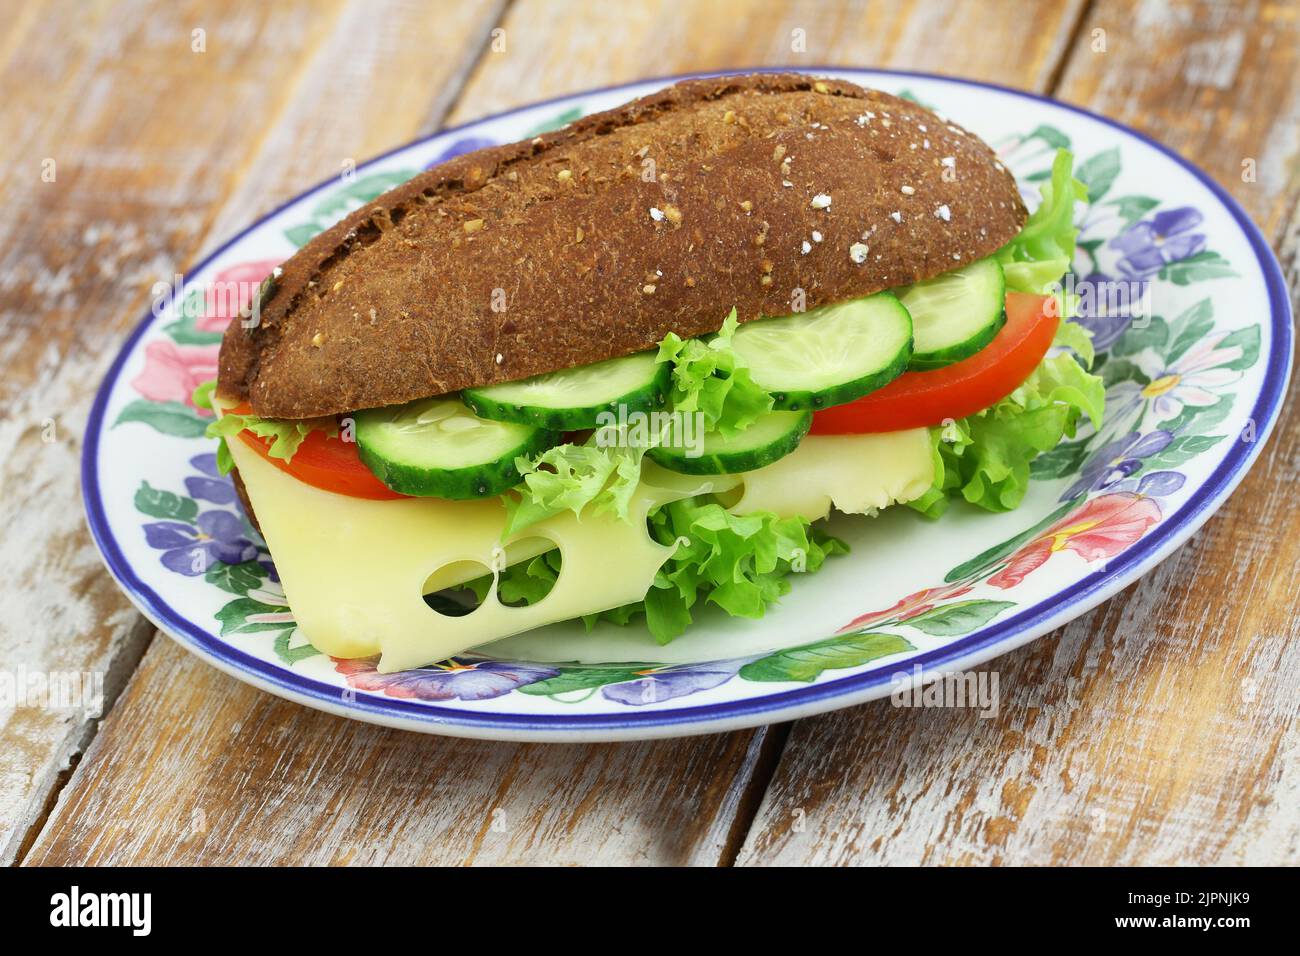 Whole grain roll with Swiss cheese, lettuce, tomato and cucumber on colorful vintage plate on wooden surface Stock Photo